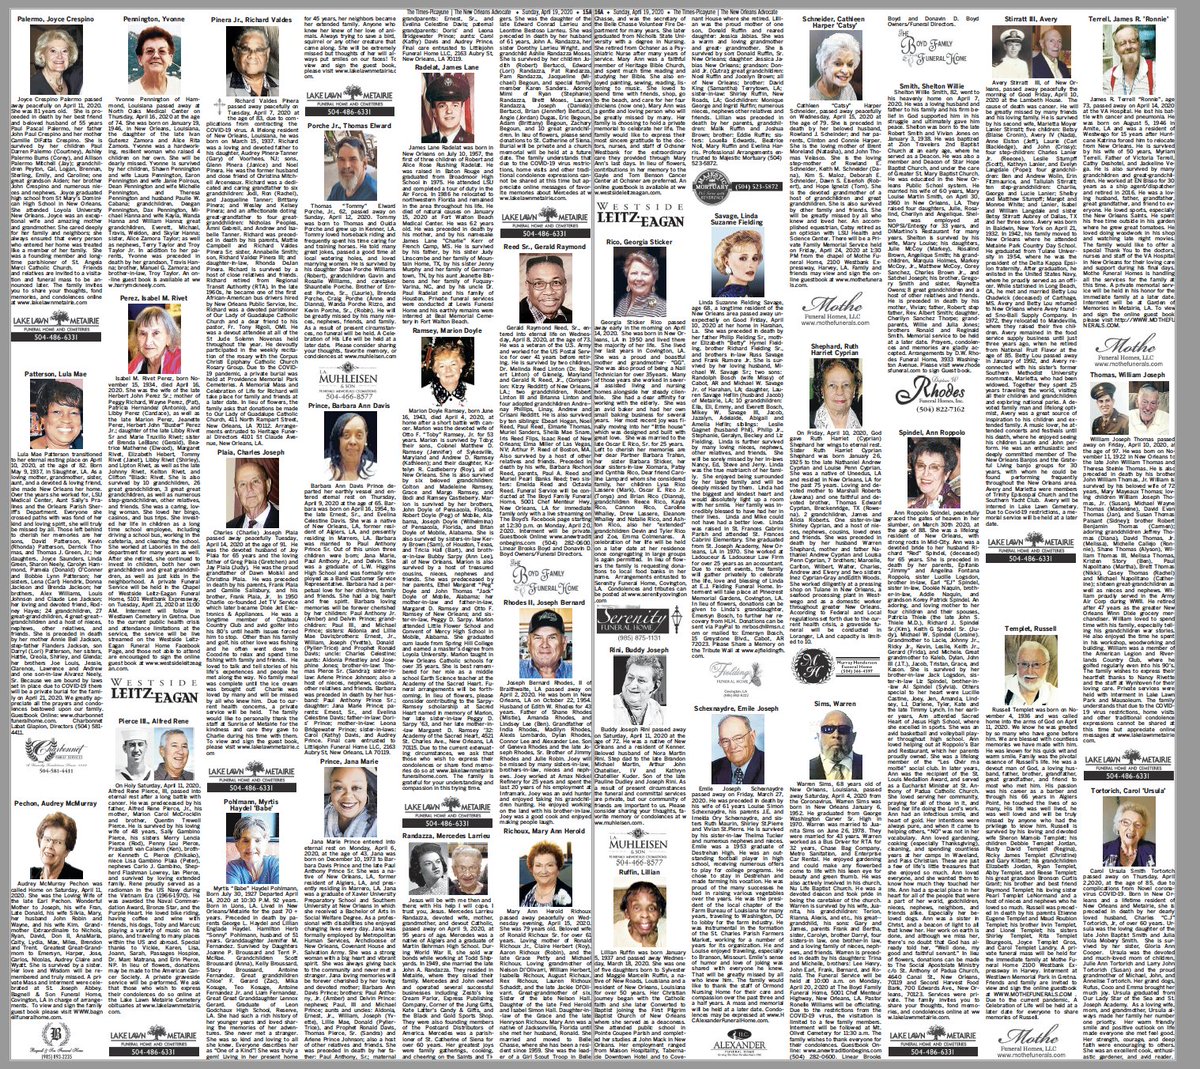 In today's  @NOLAnews, we had just over 8 pages of death notices. It's been like this the last few Sundays, which is the biggest day of readership. We used to consider 4 pages a lot. All of these beloved family members and friends for so many. And no funerals.